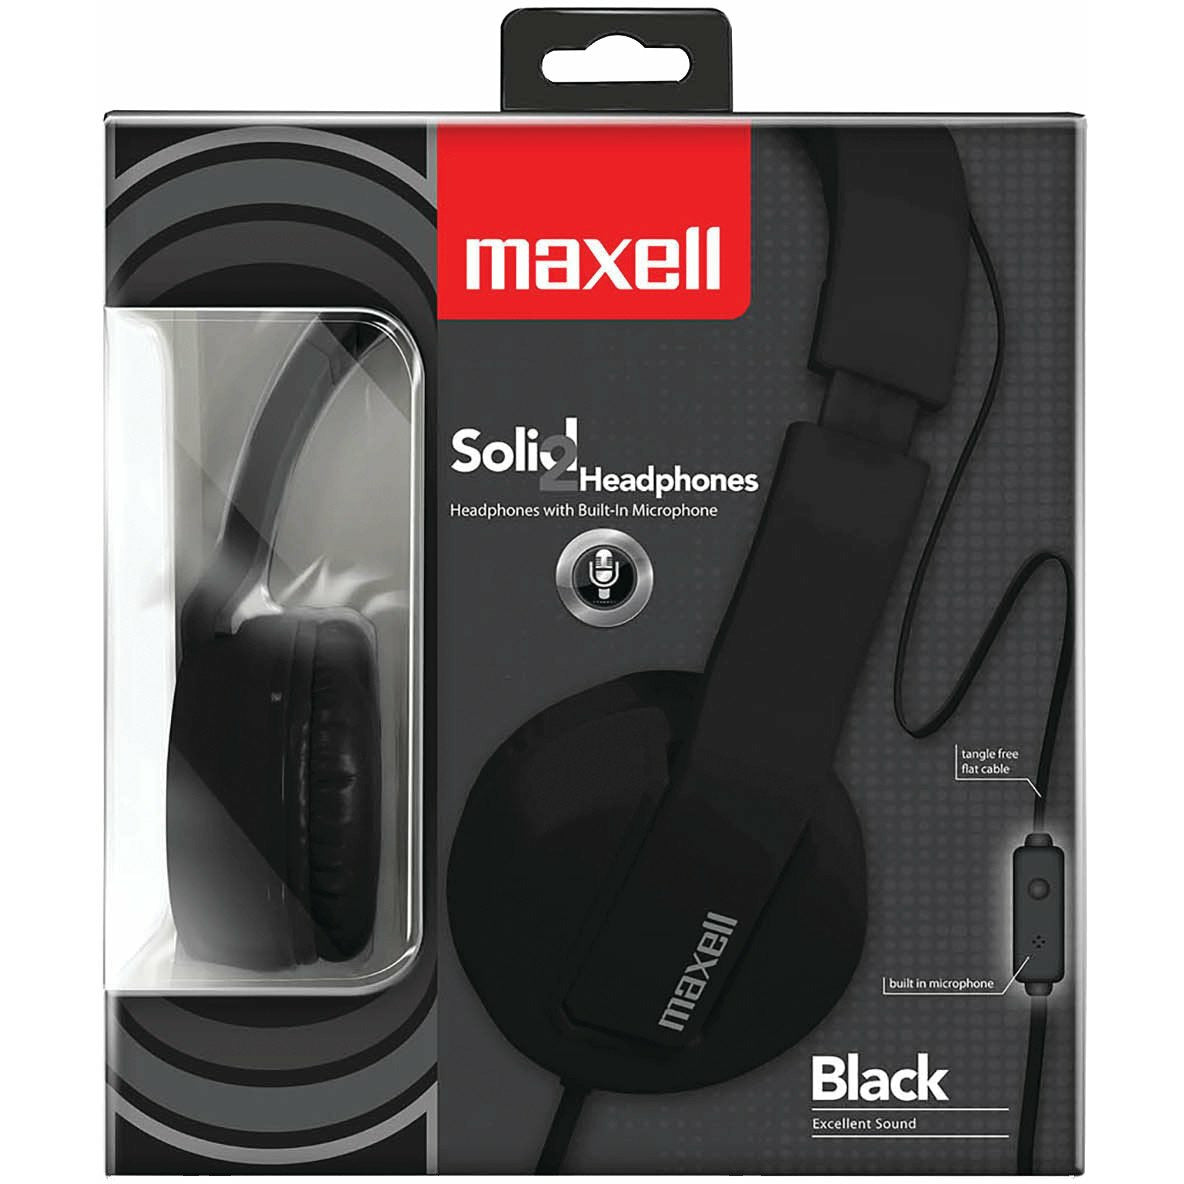 Maxell Solid Headphones with Mic & Share Port